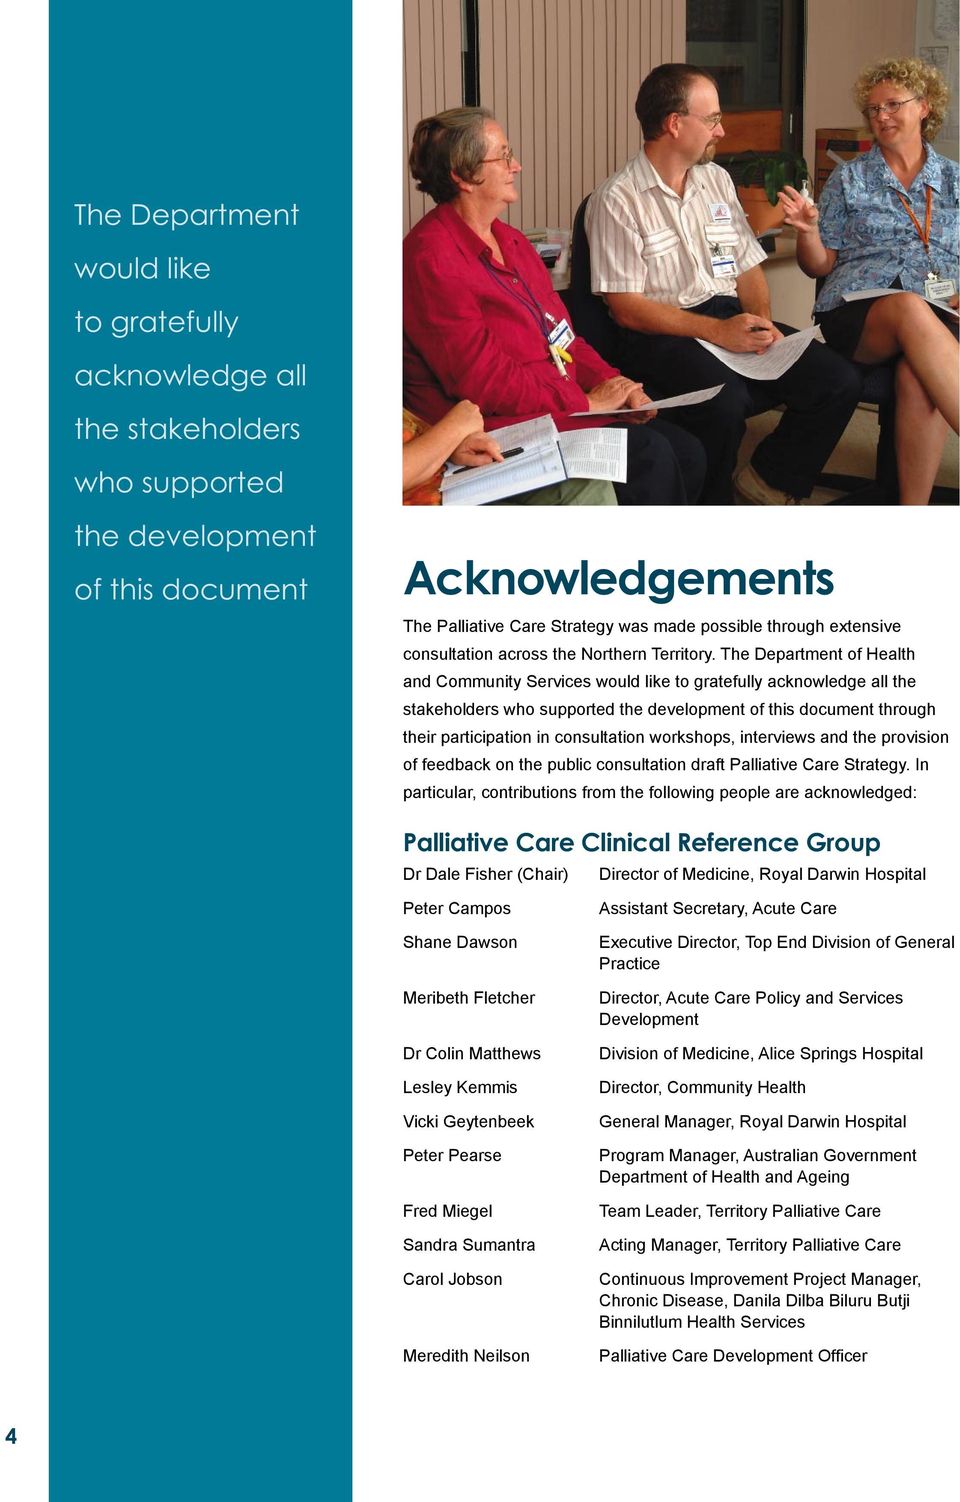 The Department of Health and Community Services would like to gratefully acknowledge all the stakeholders who supported the development of this document through their participation in consultation